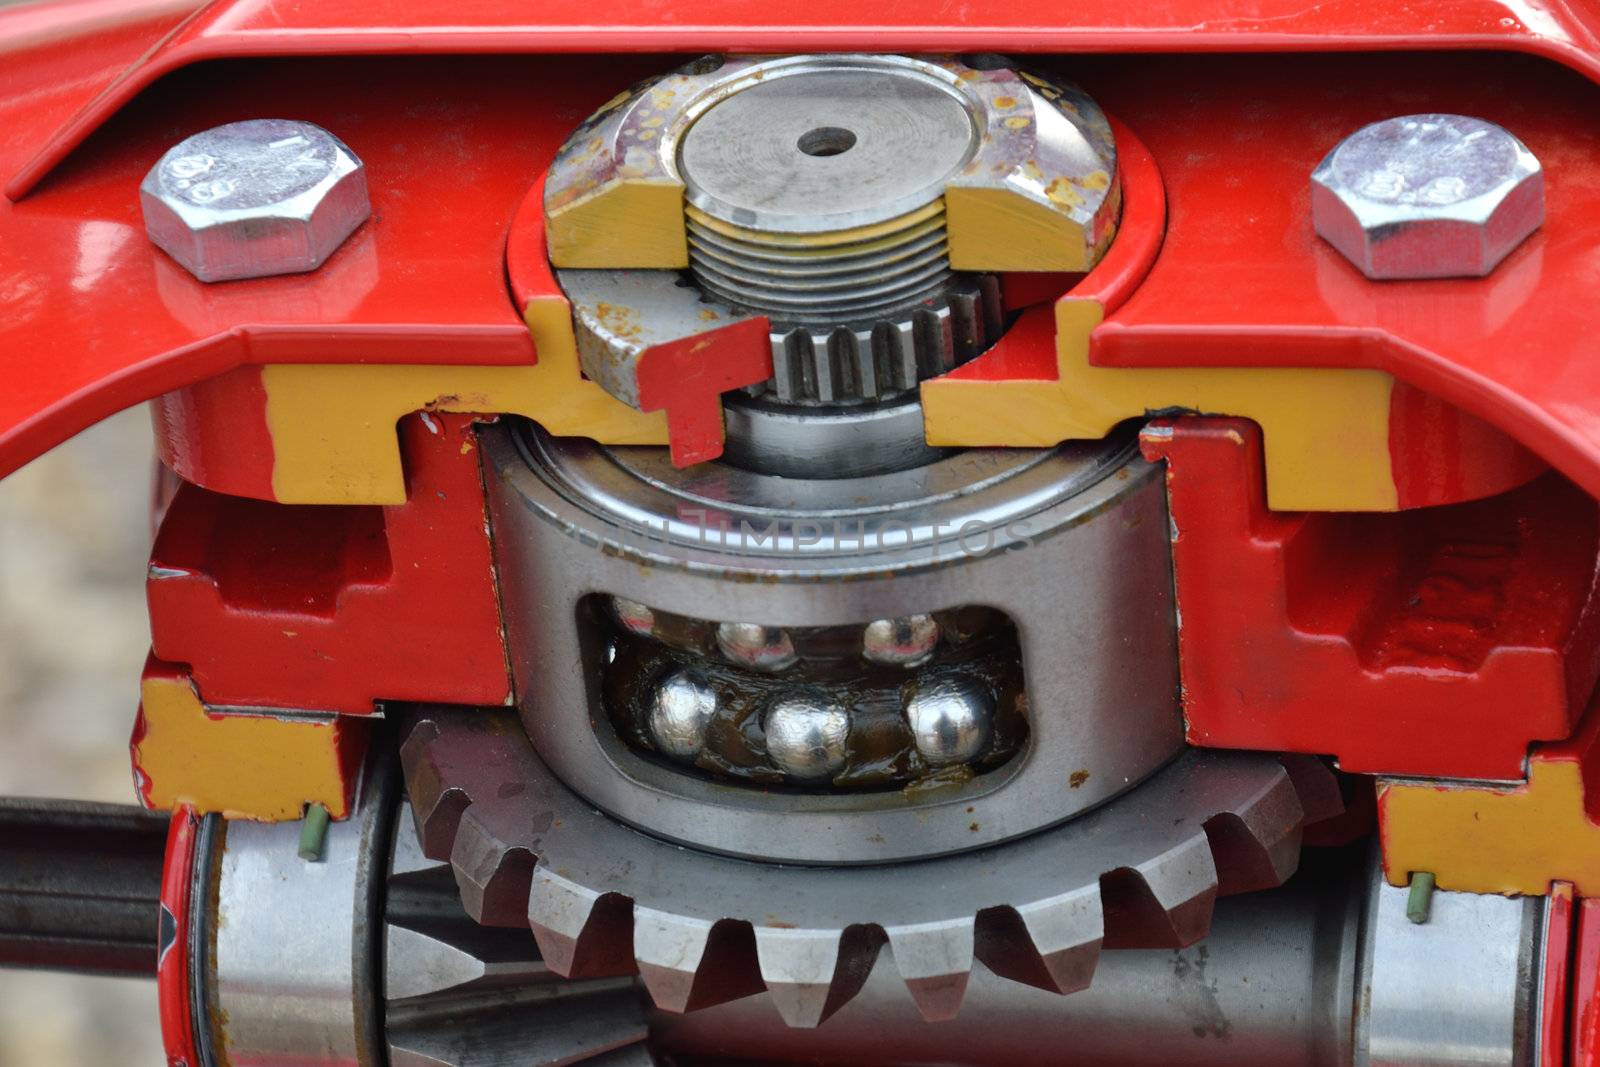 Heavy gear machinery with bearings